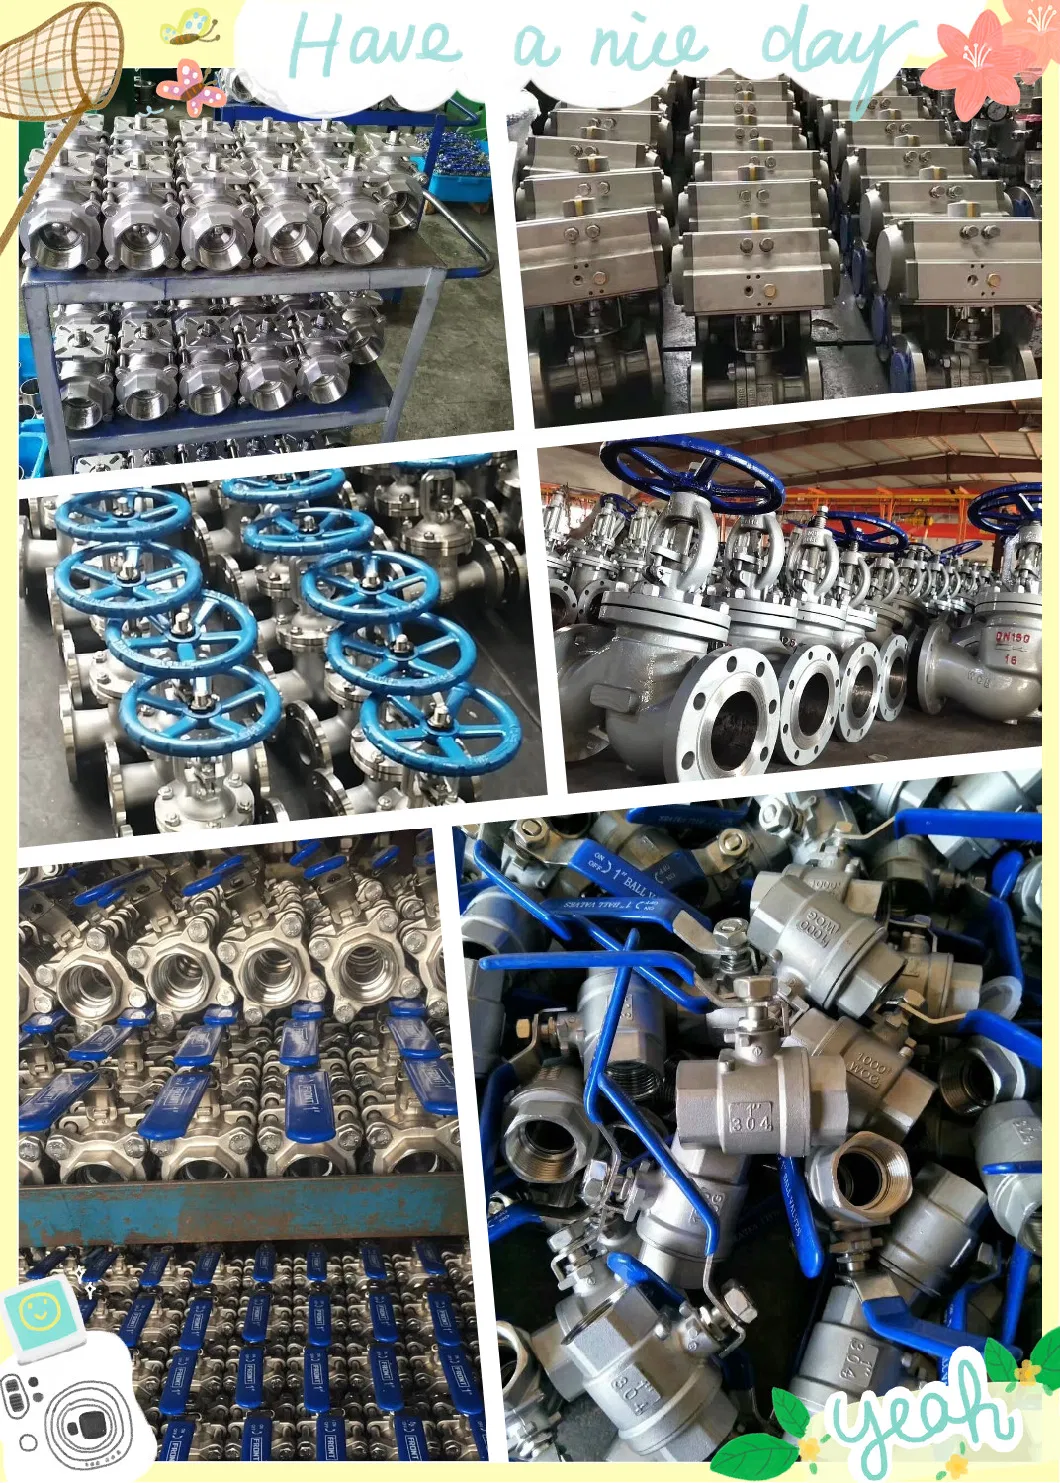 BS1868/API 600 OEM Carbon/Stainless Steel Class 150 Flanged/Welded Bevel Gear Electric/Pneumatic/Hydraulic Industrial Oil Gas Water OS&Y Wedge Globe Valve